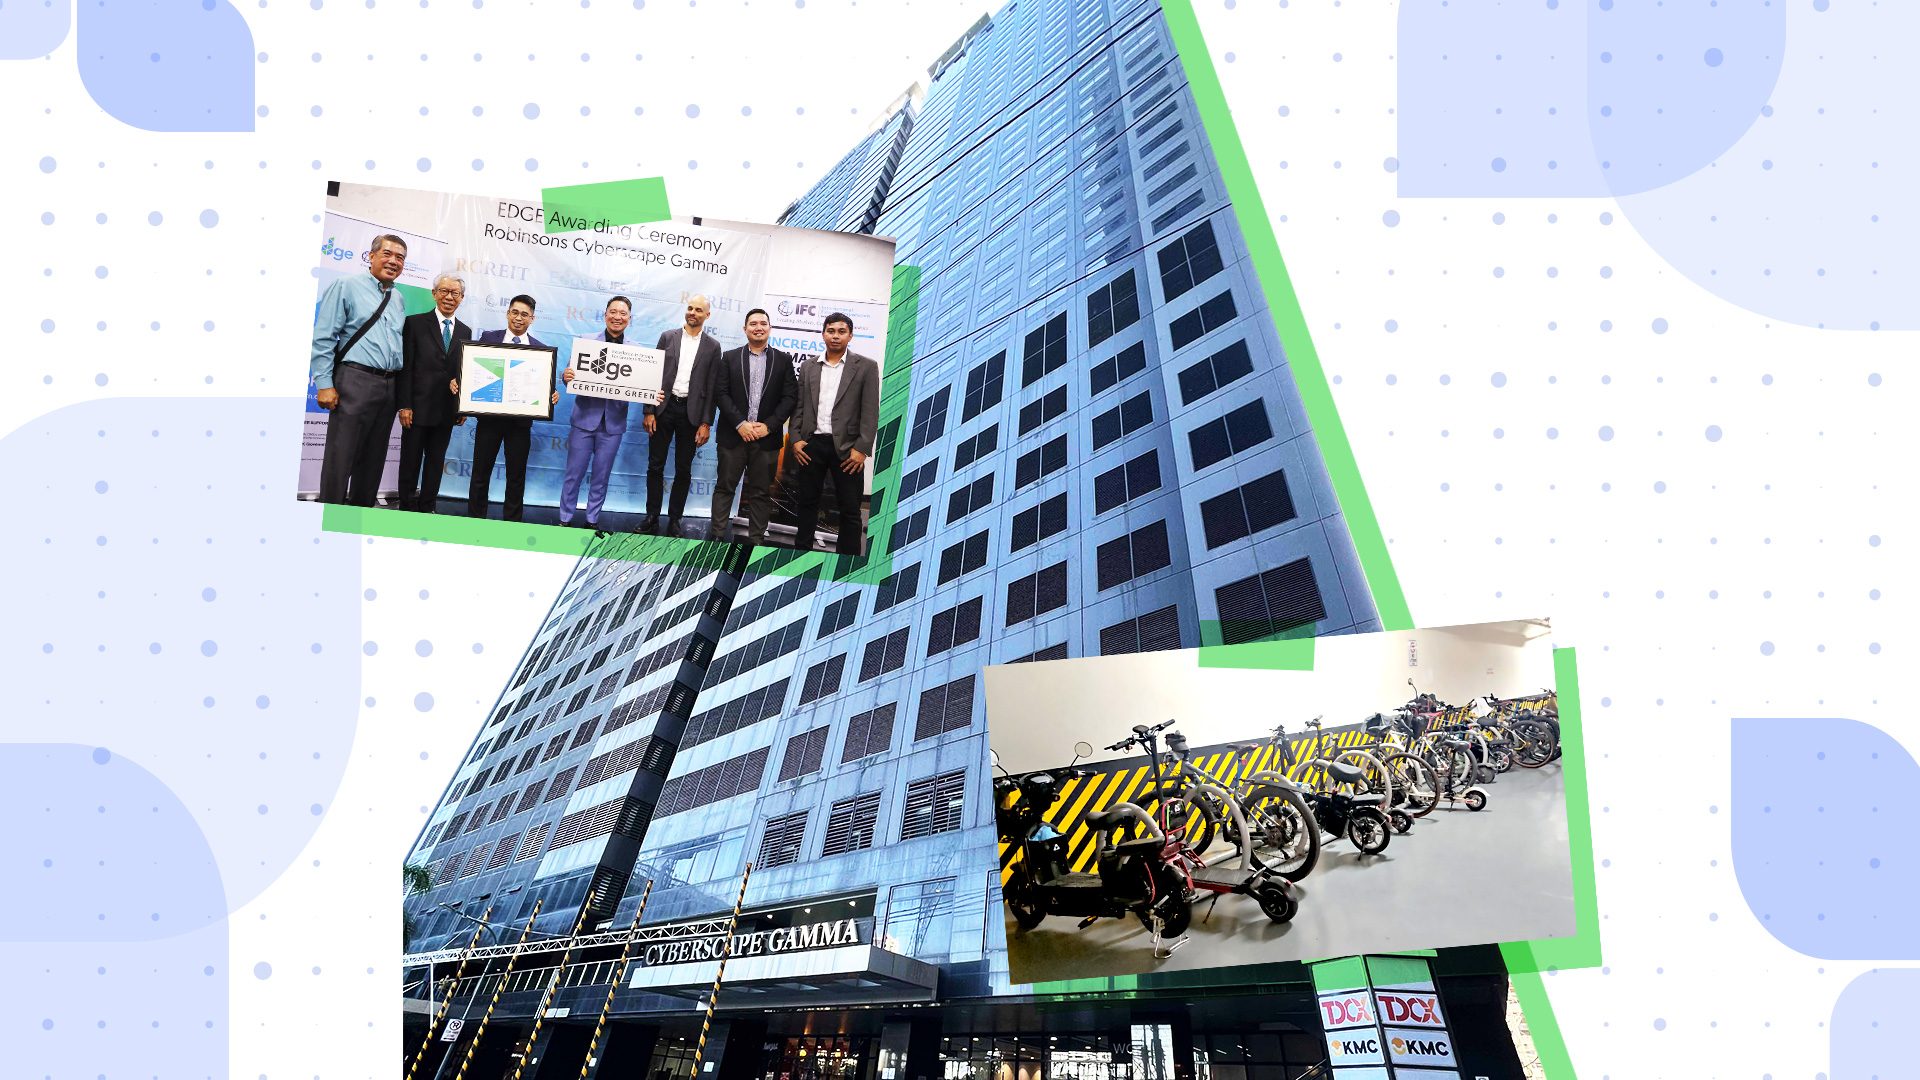 From bike racks to EDGE certifications: How Robinsons is promoting sustainable workspace efforts